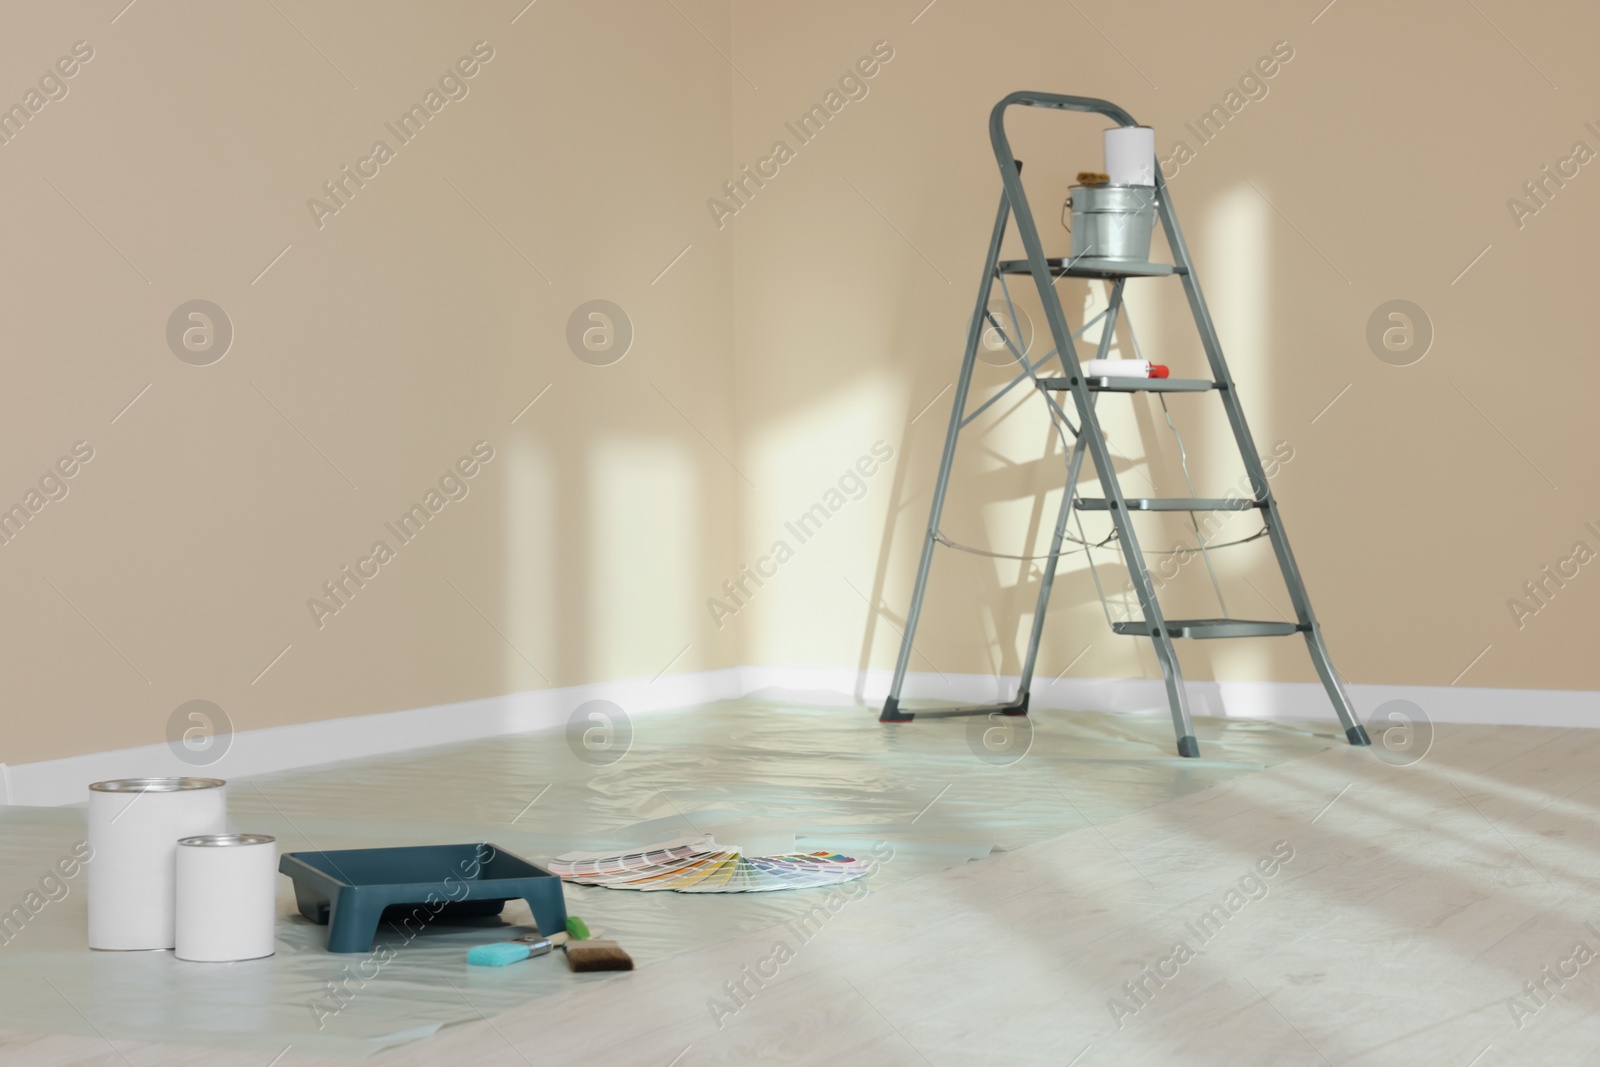 Photo of Stepladder and painting tools near wall in empty room, space for text